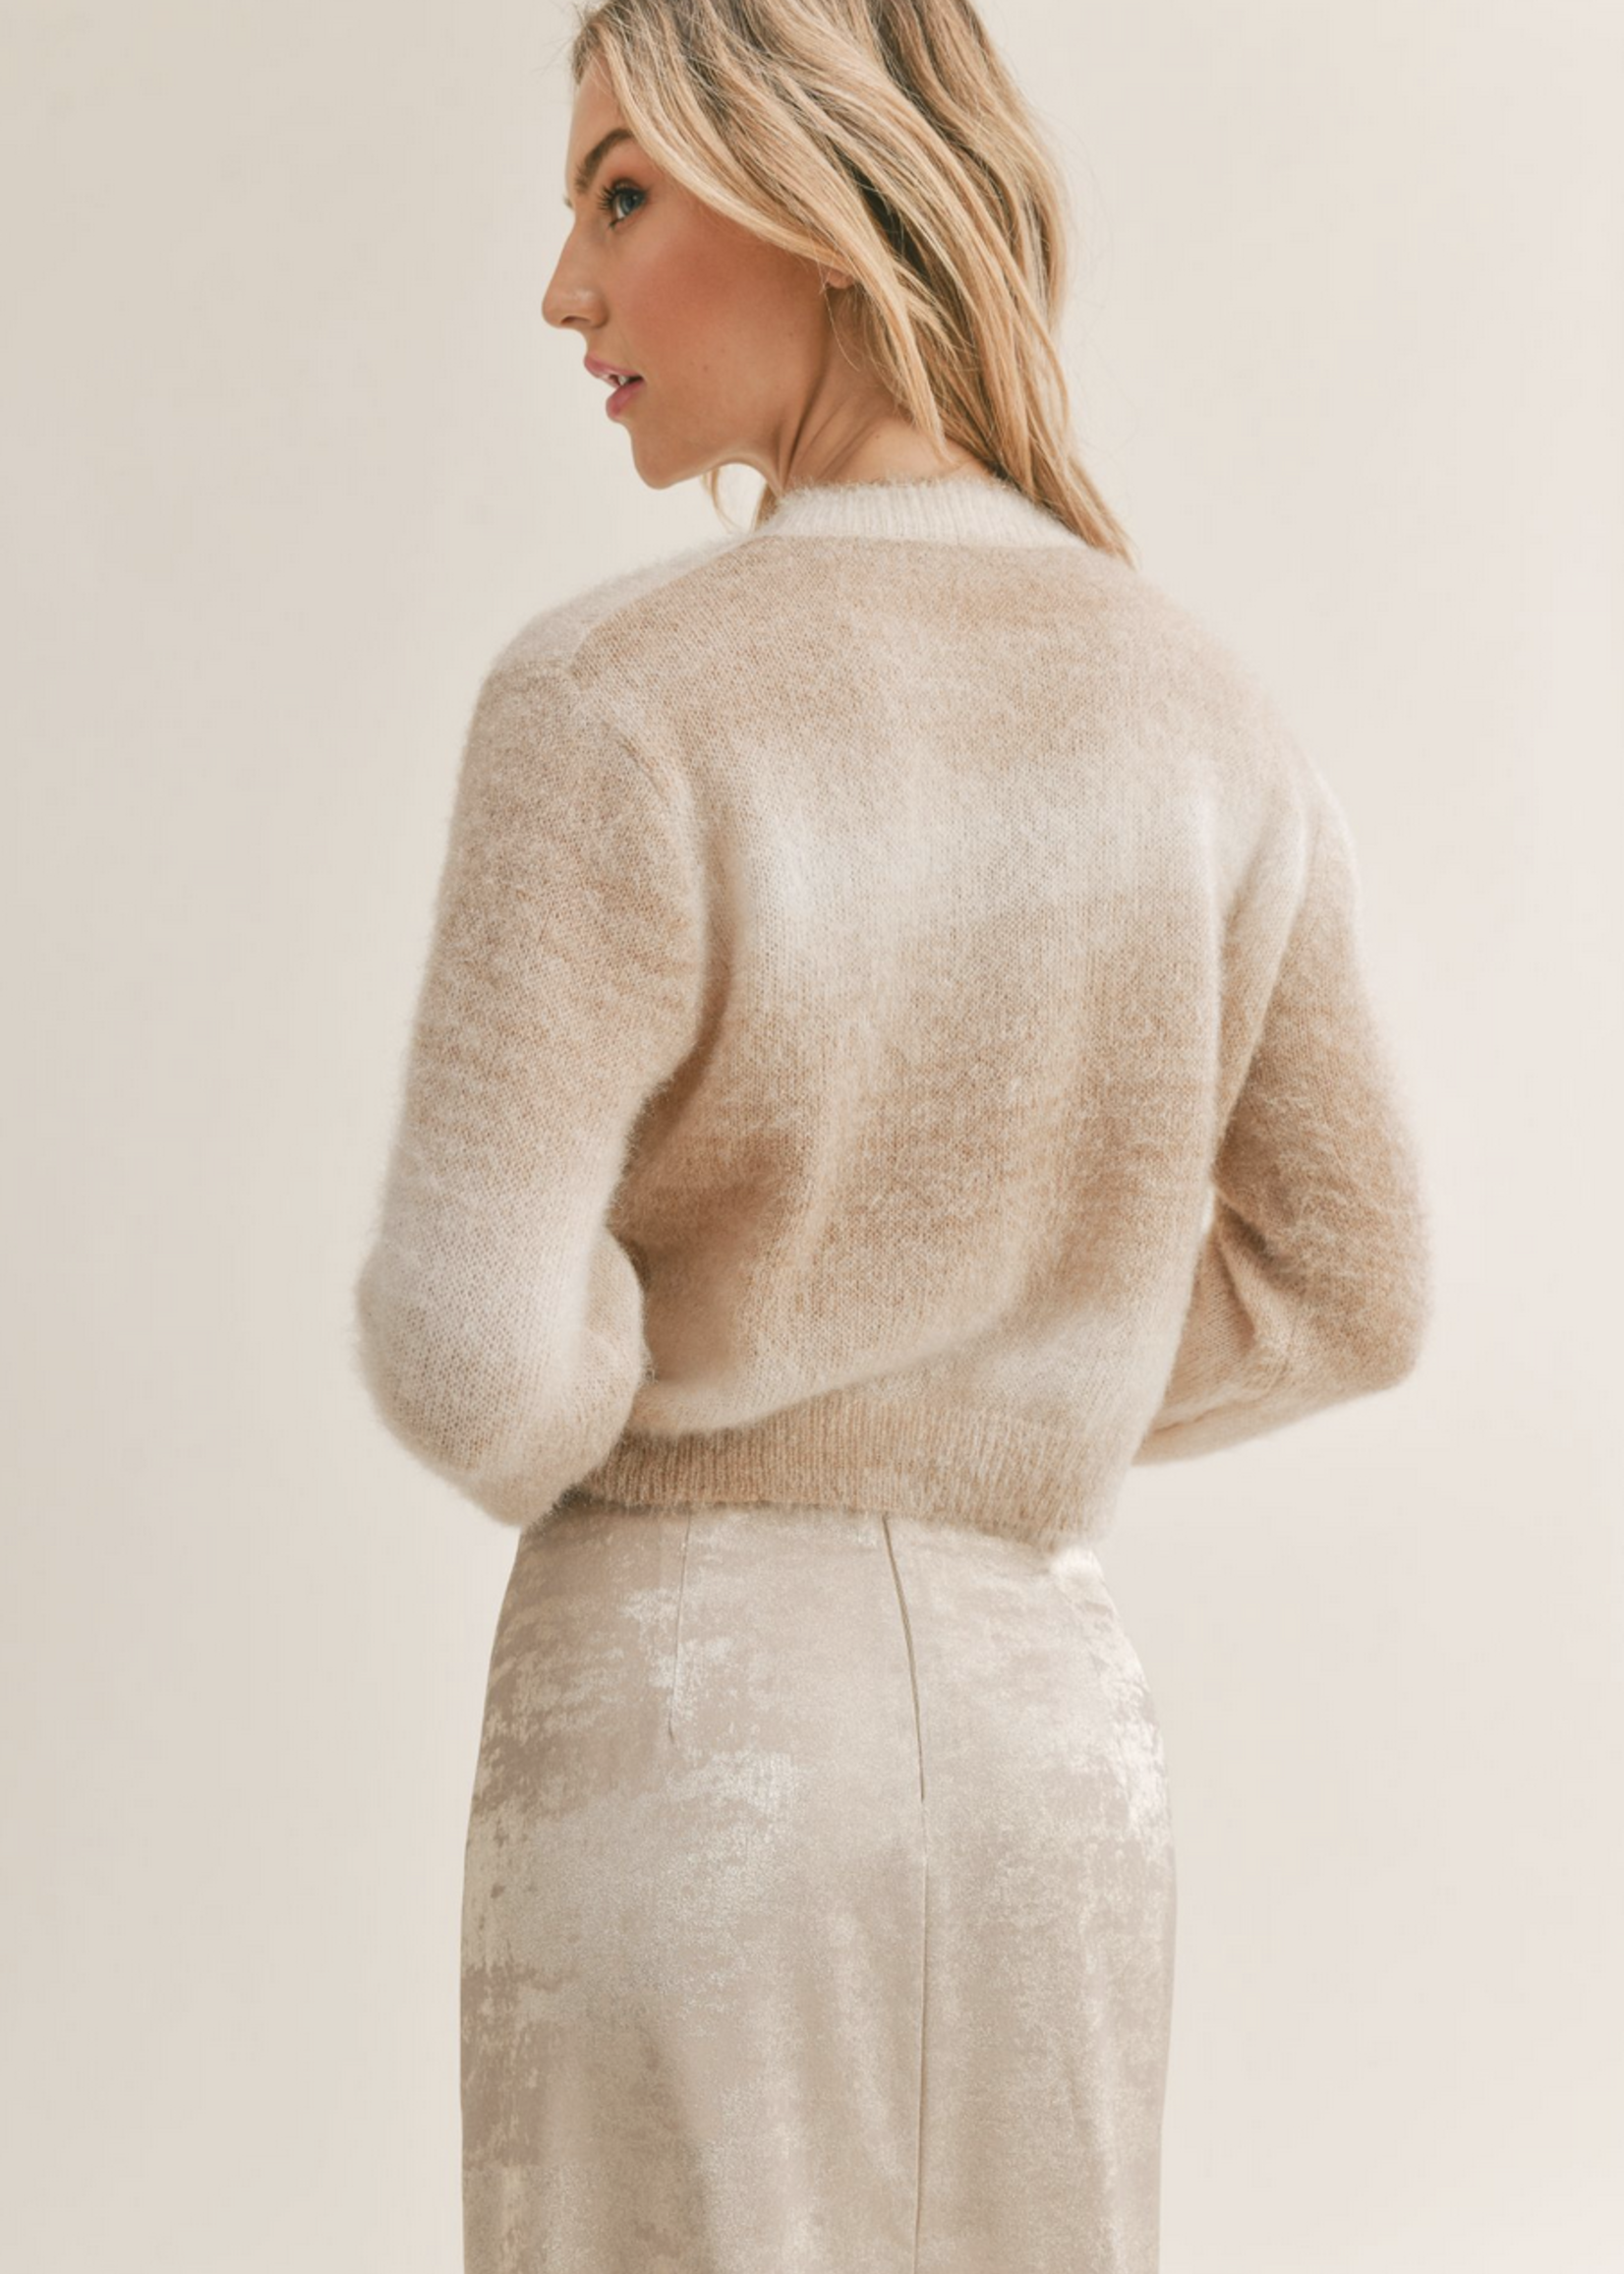 SAGE THE LABEL REACH FOR THE STARS OMBRE SWEATER